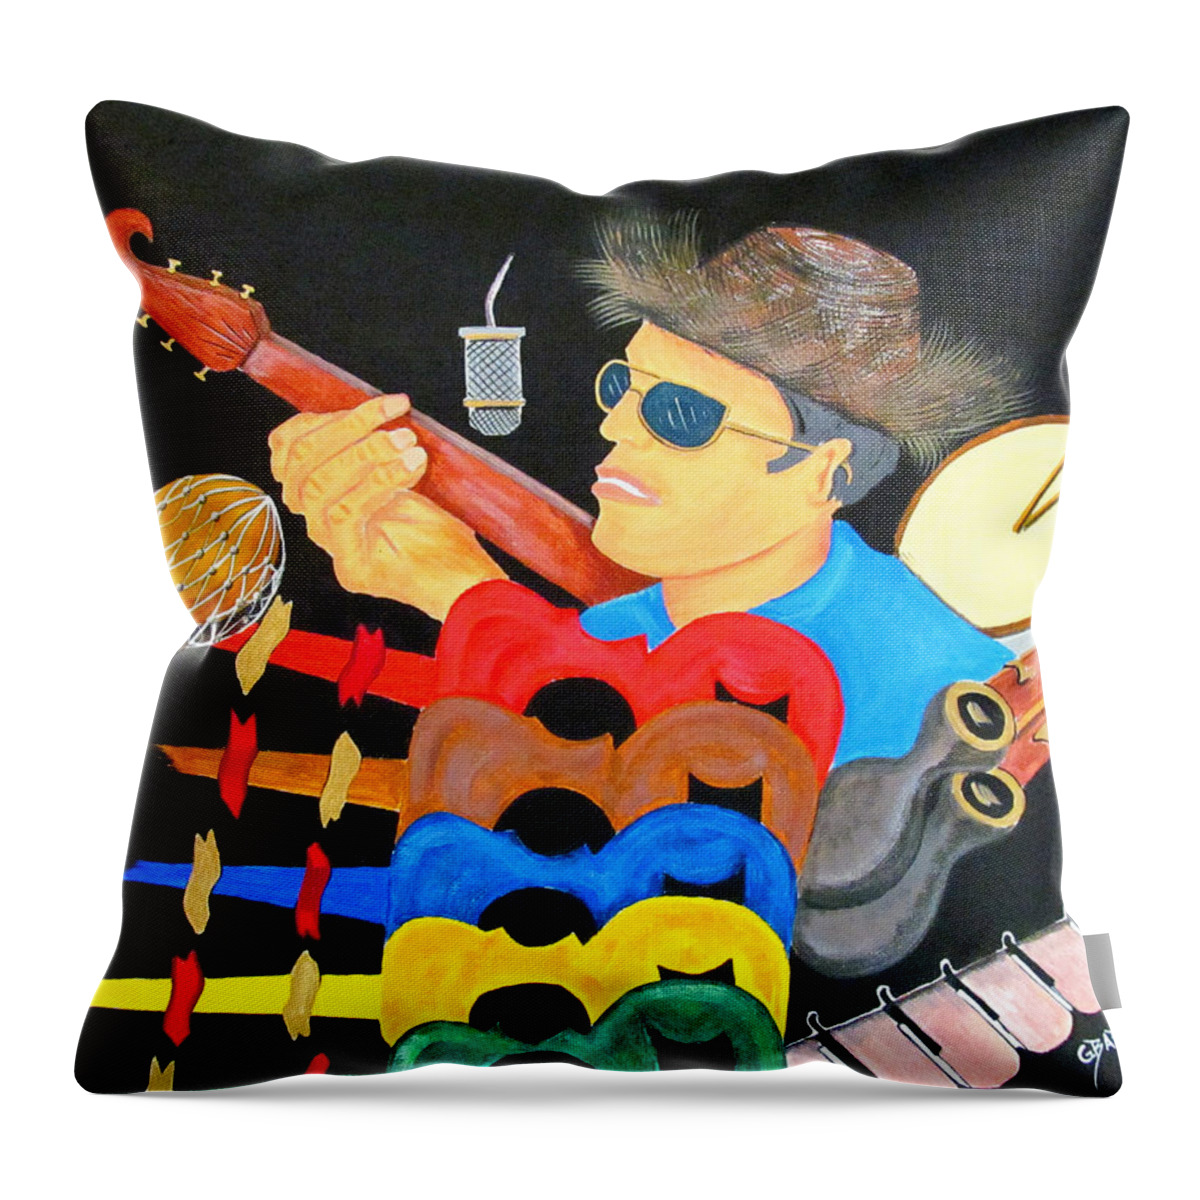 Music Throw Pillow featuring the painting Musical Man by Gloria E Barreto-Rodriguez